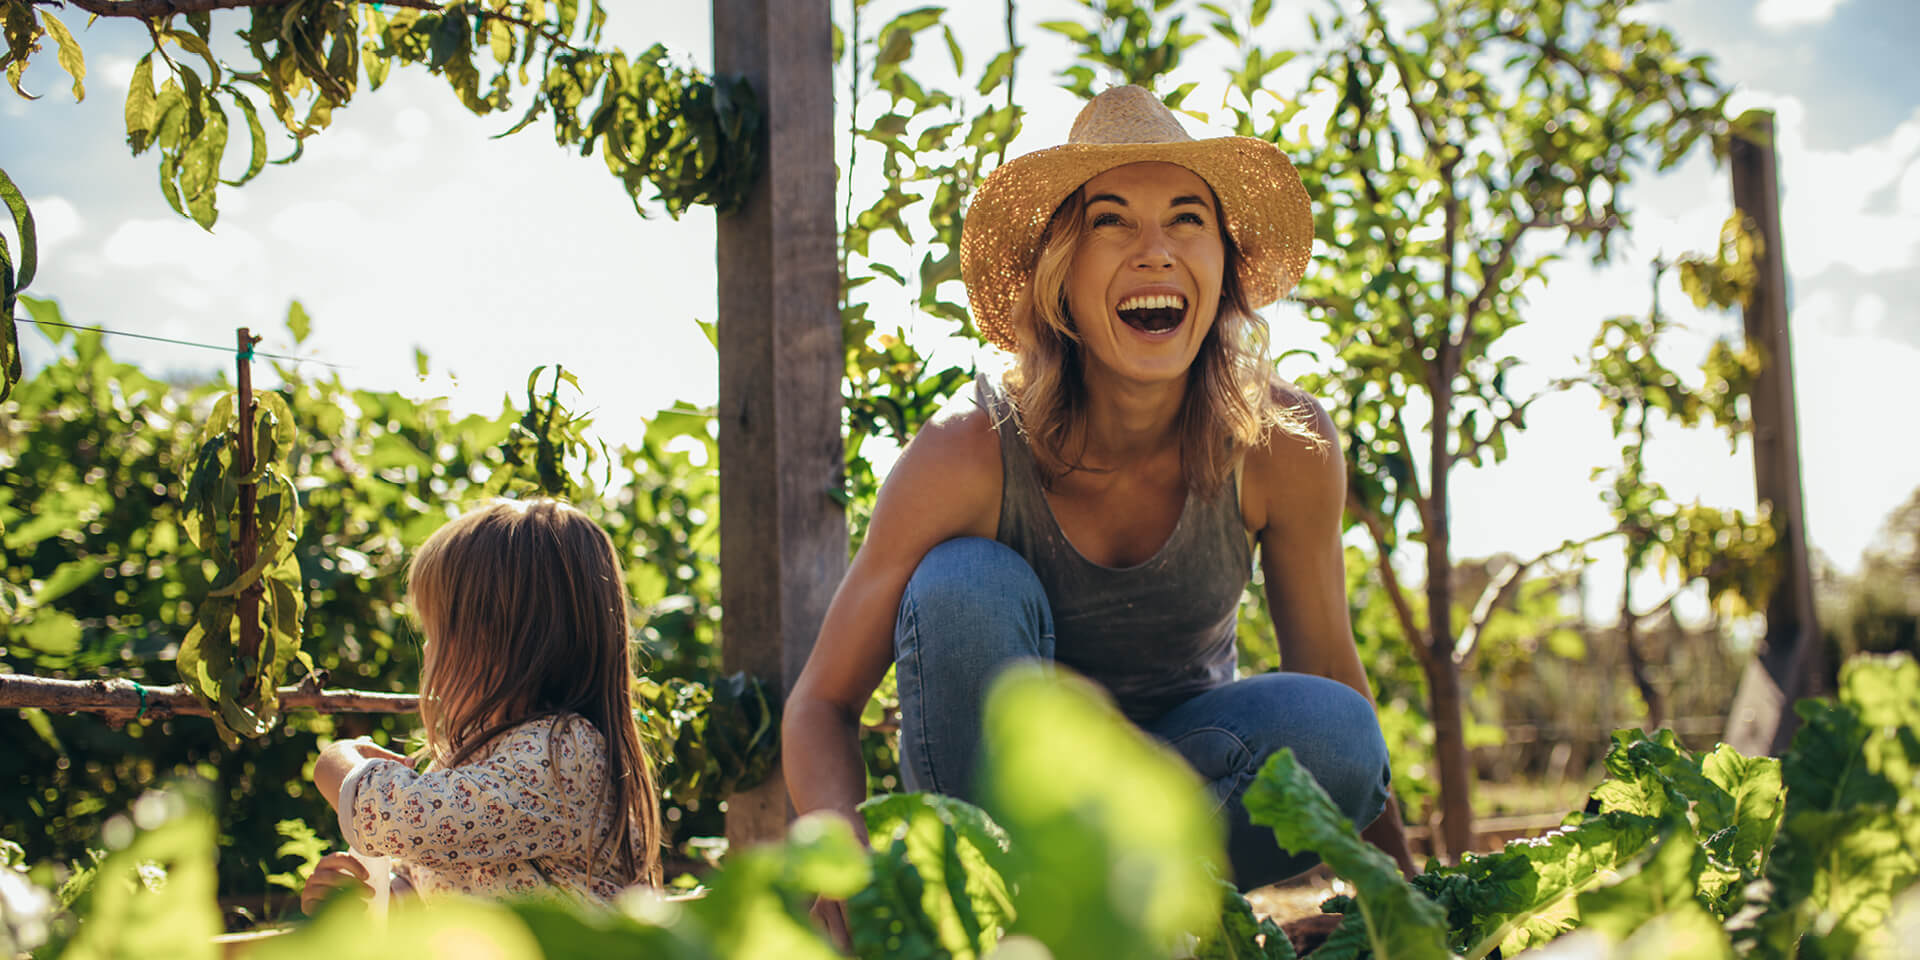 Mother and daughter sitting together laughing in vegetable garden